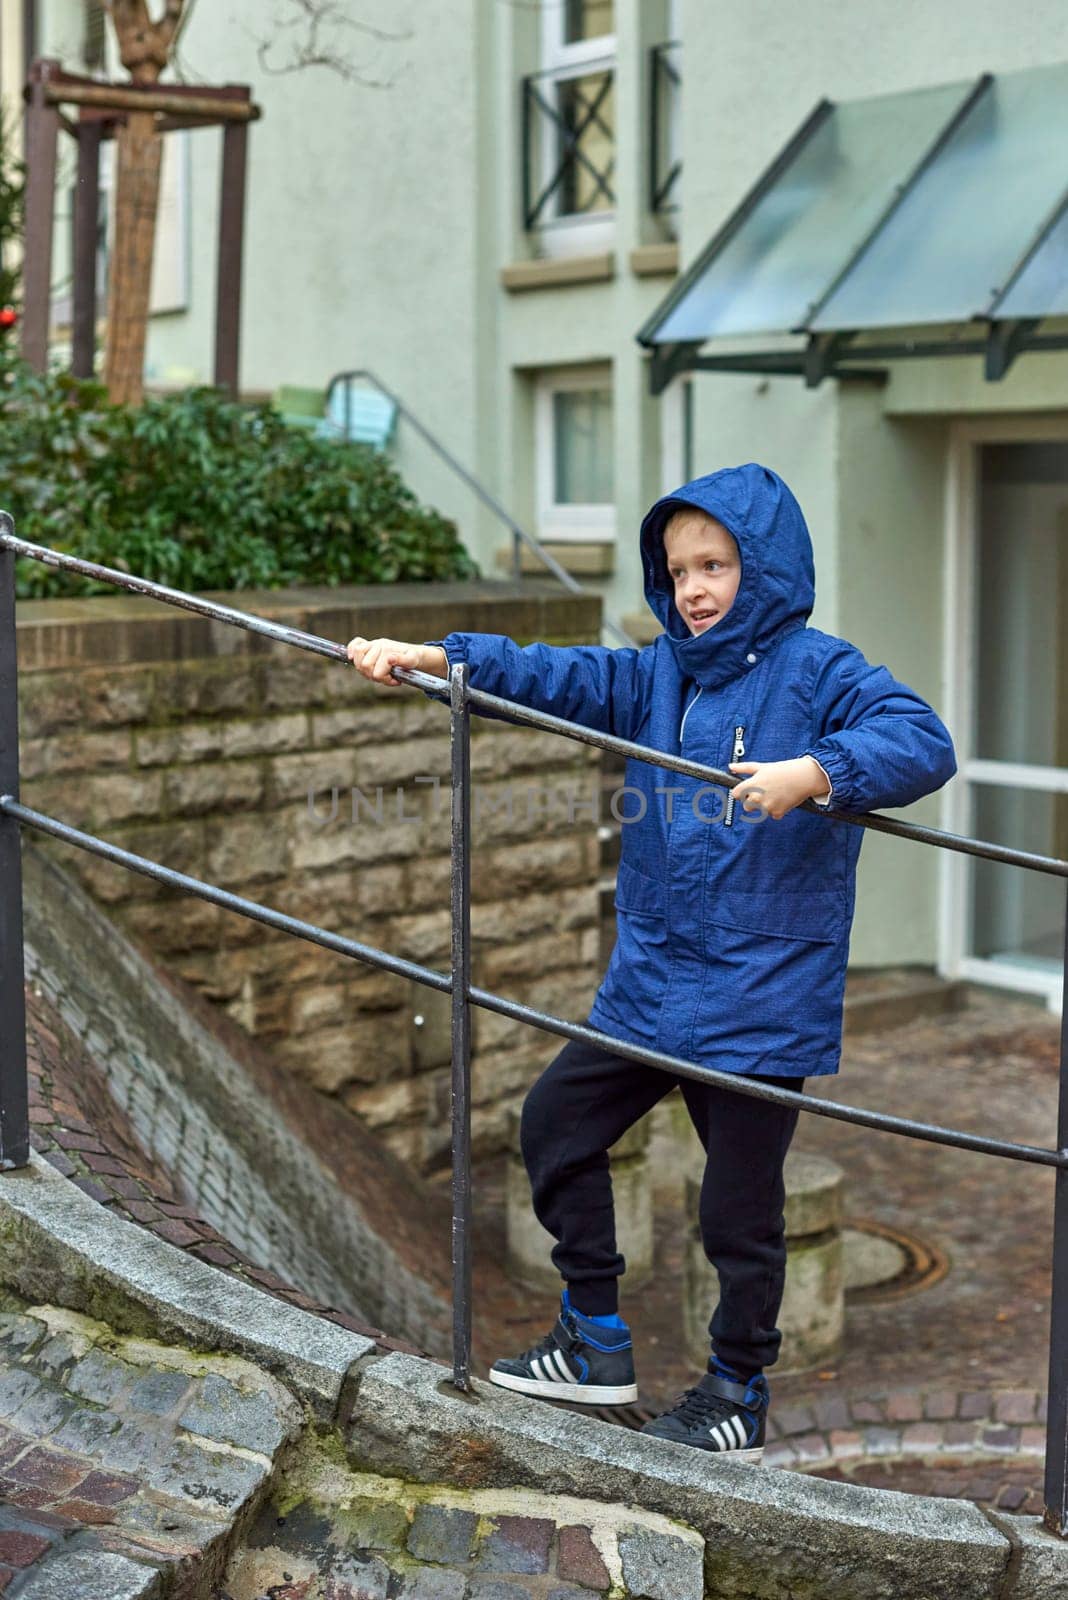 Joyful Boy in Blue Winter Jacket on Outdoor Stairs with City Buildings in the Background, Autumn or Winter. cheerful 8-year-old boy wearing a blue winter jacket and hood, standing on an outdoor staircase, holding onto the railing. by Andrii_Ko